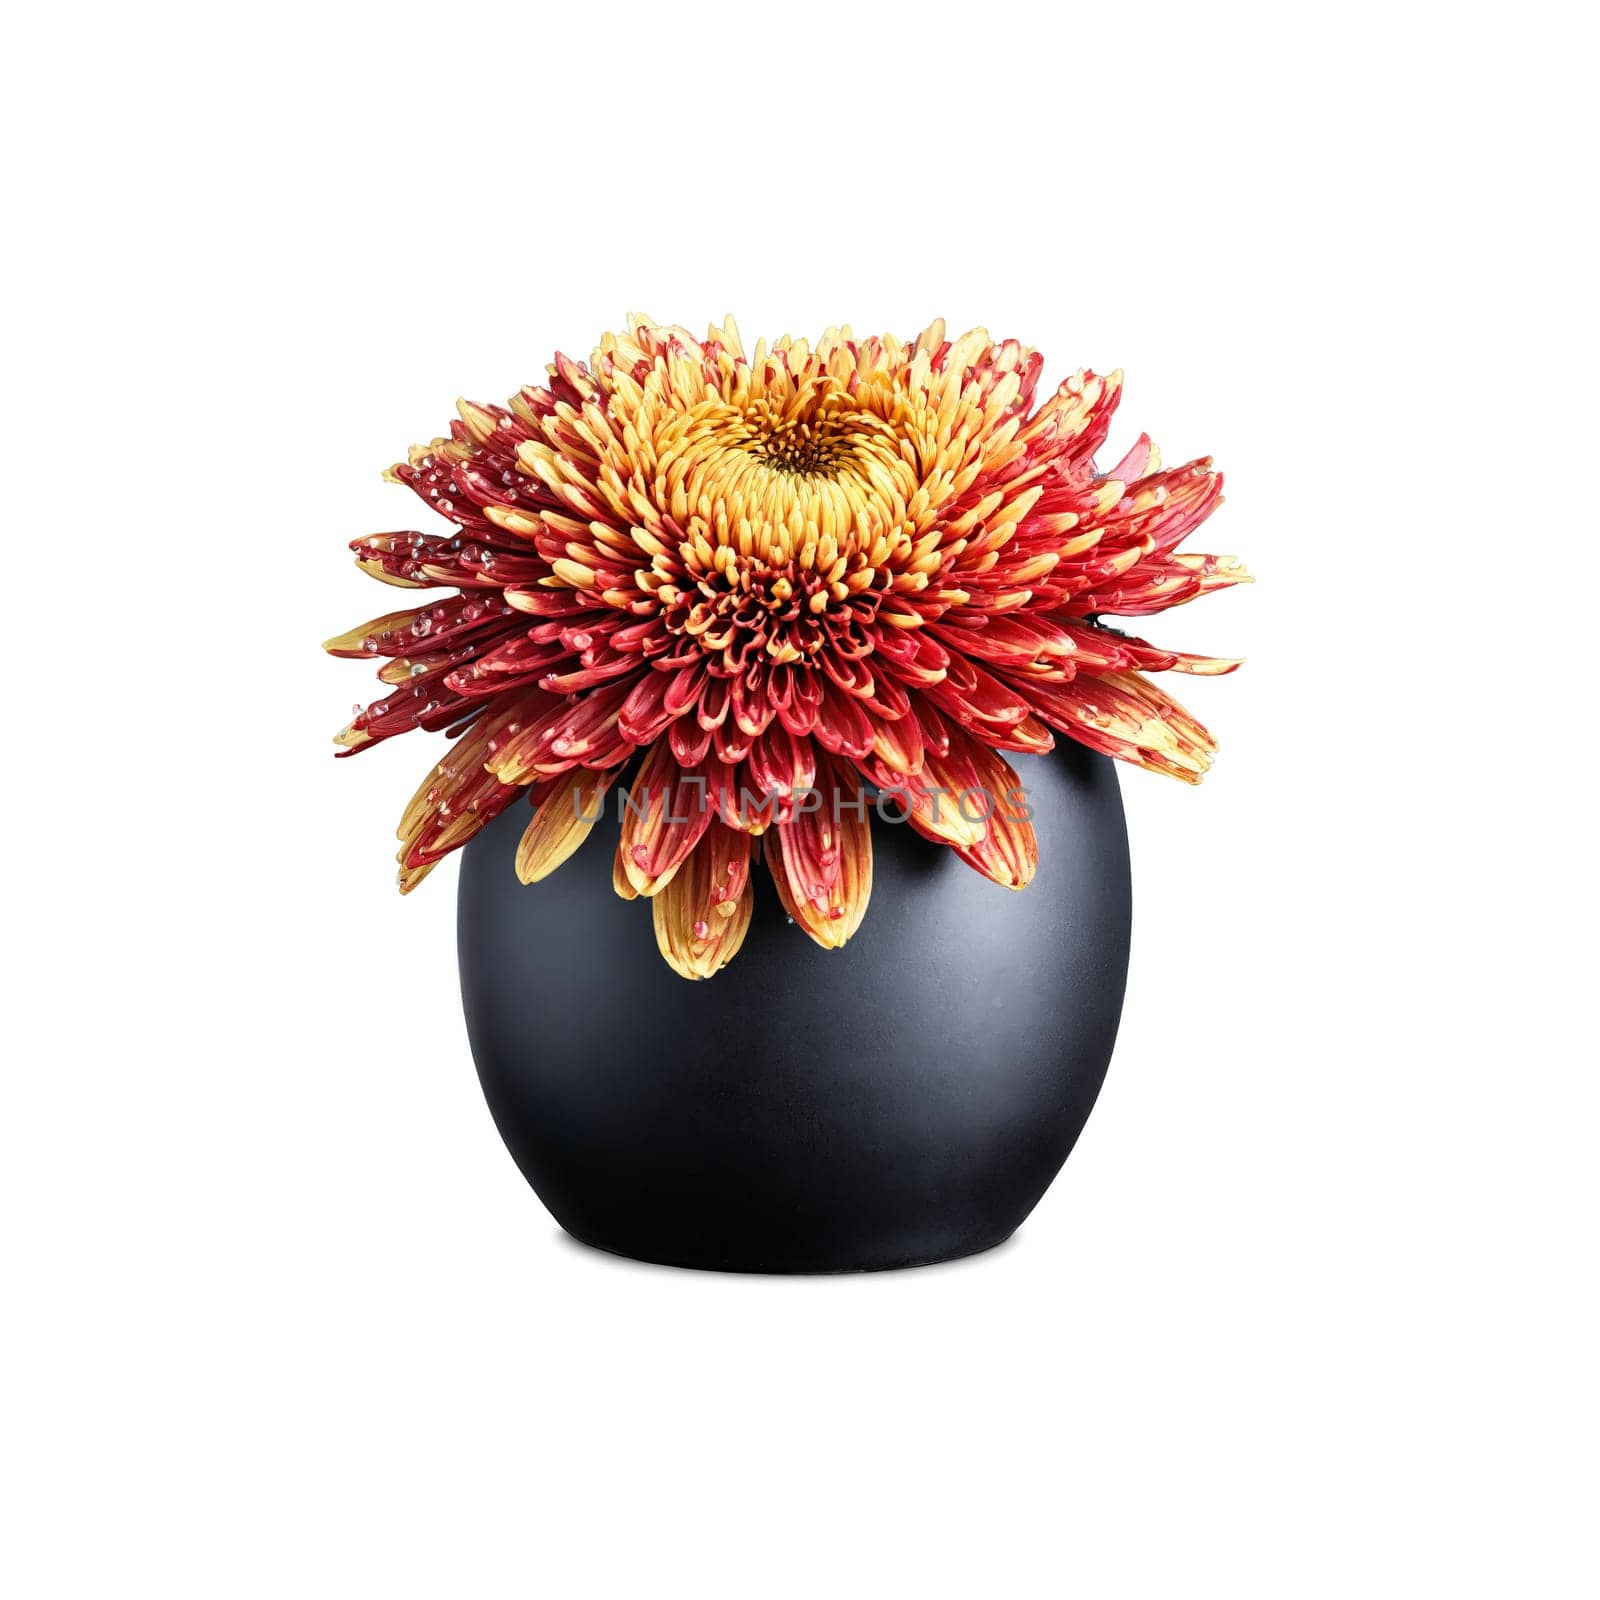 Chrysanthemum lush red and gold flowers in a black ceramic pot petals glistening with dew by panophotograph